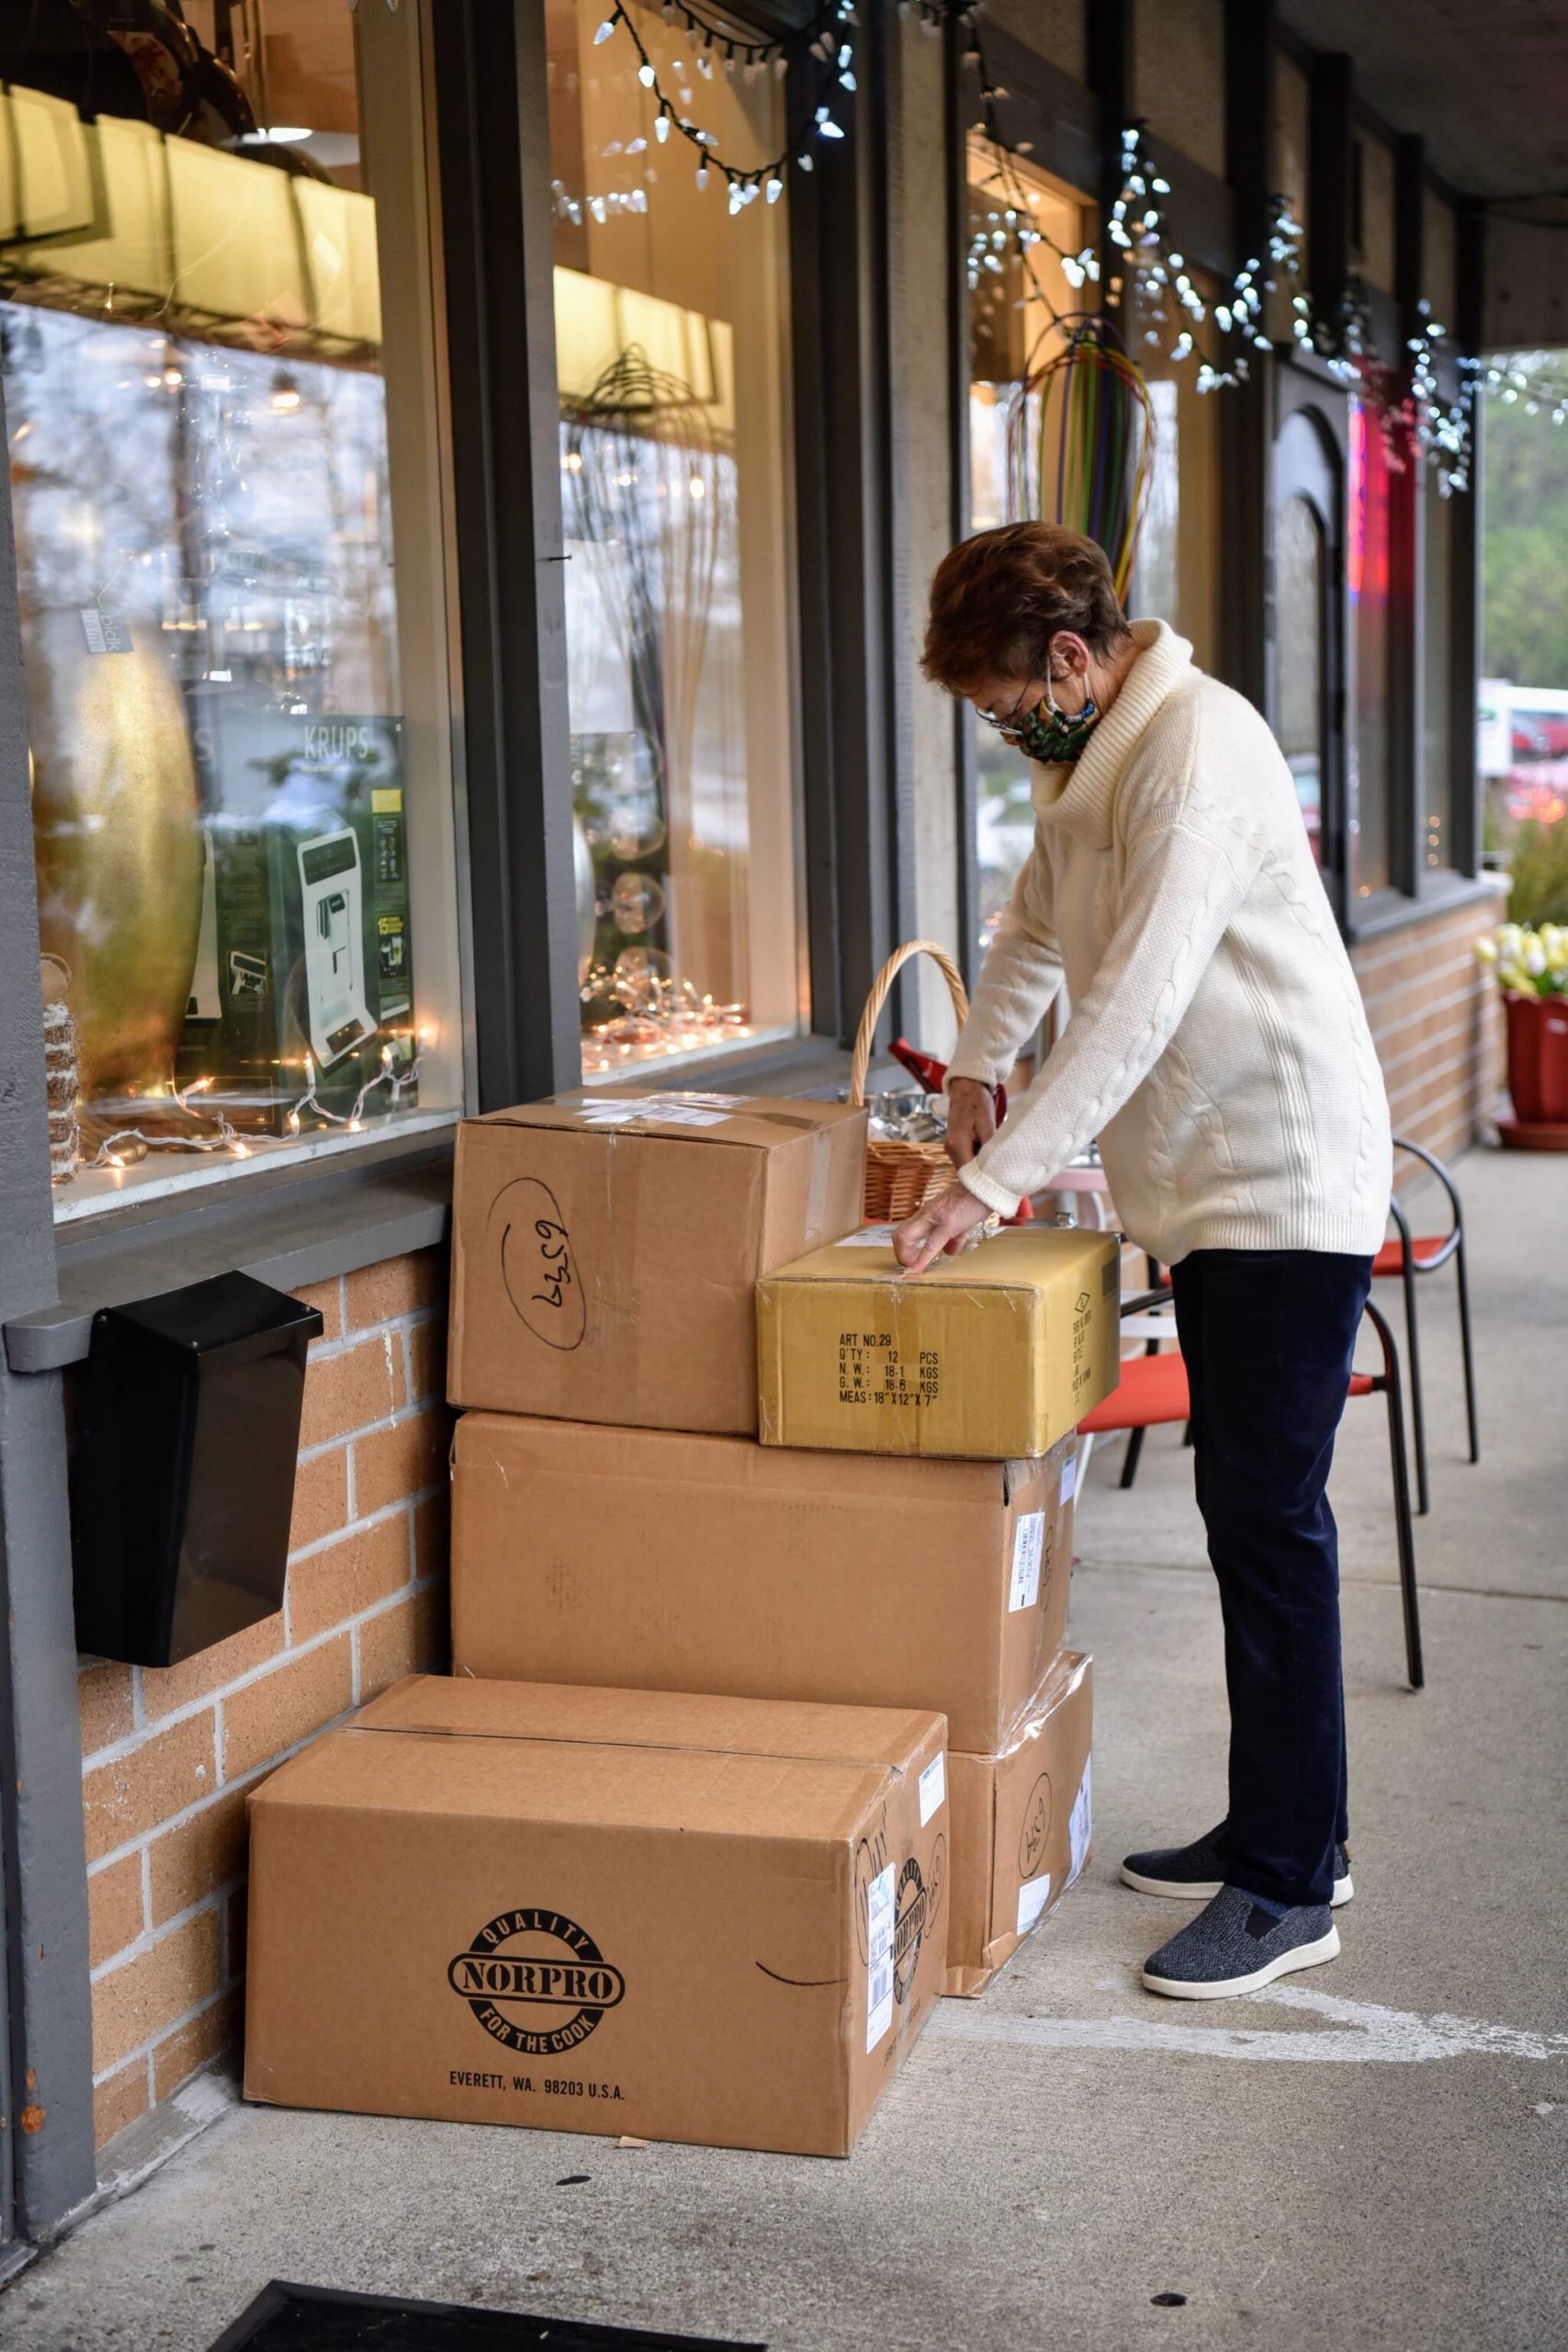 Berry Patch owner Jane Pomeroy unboxes items for her kitchen store that has been in business for 51 years.